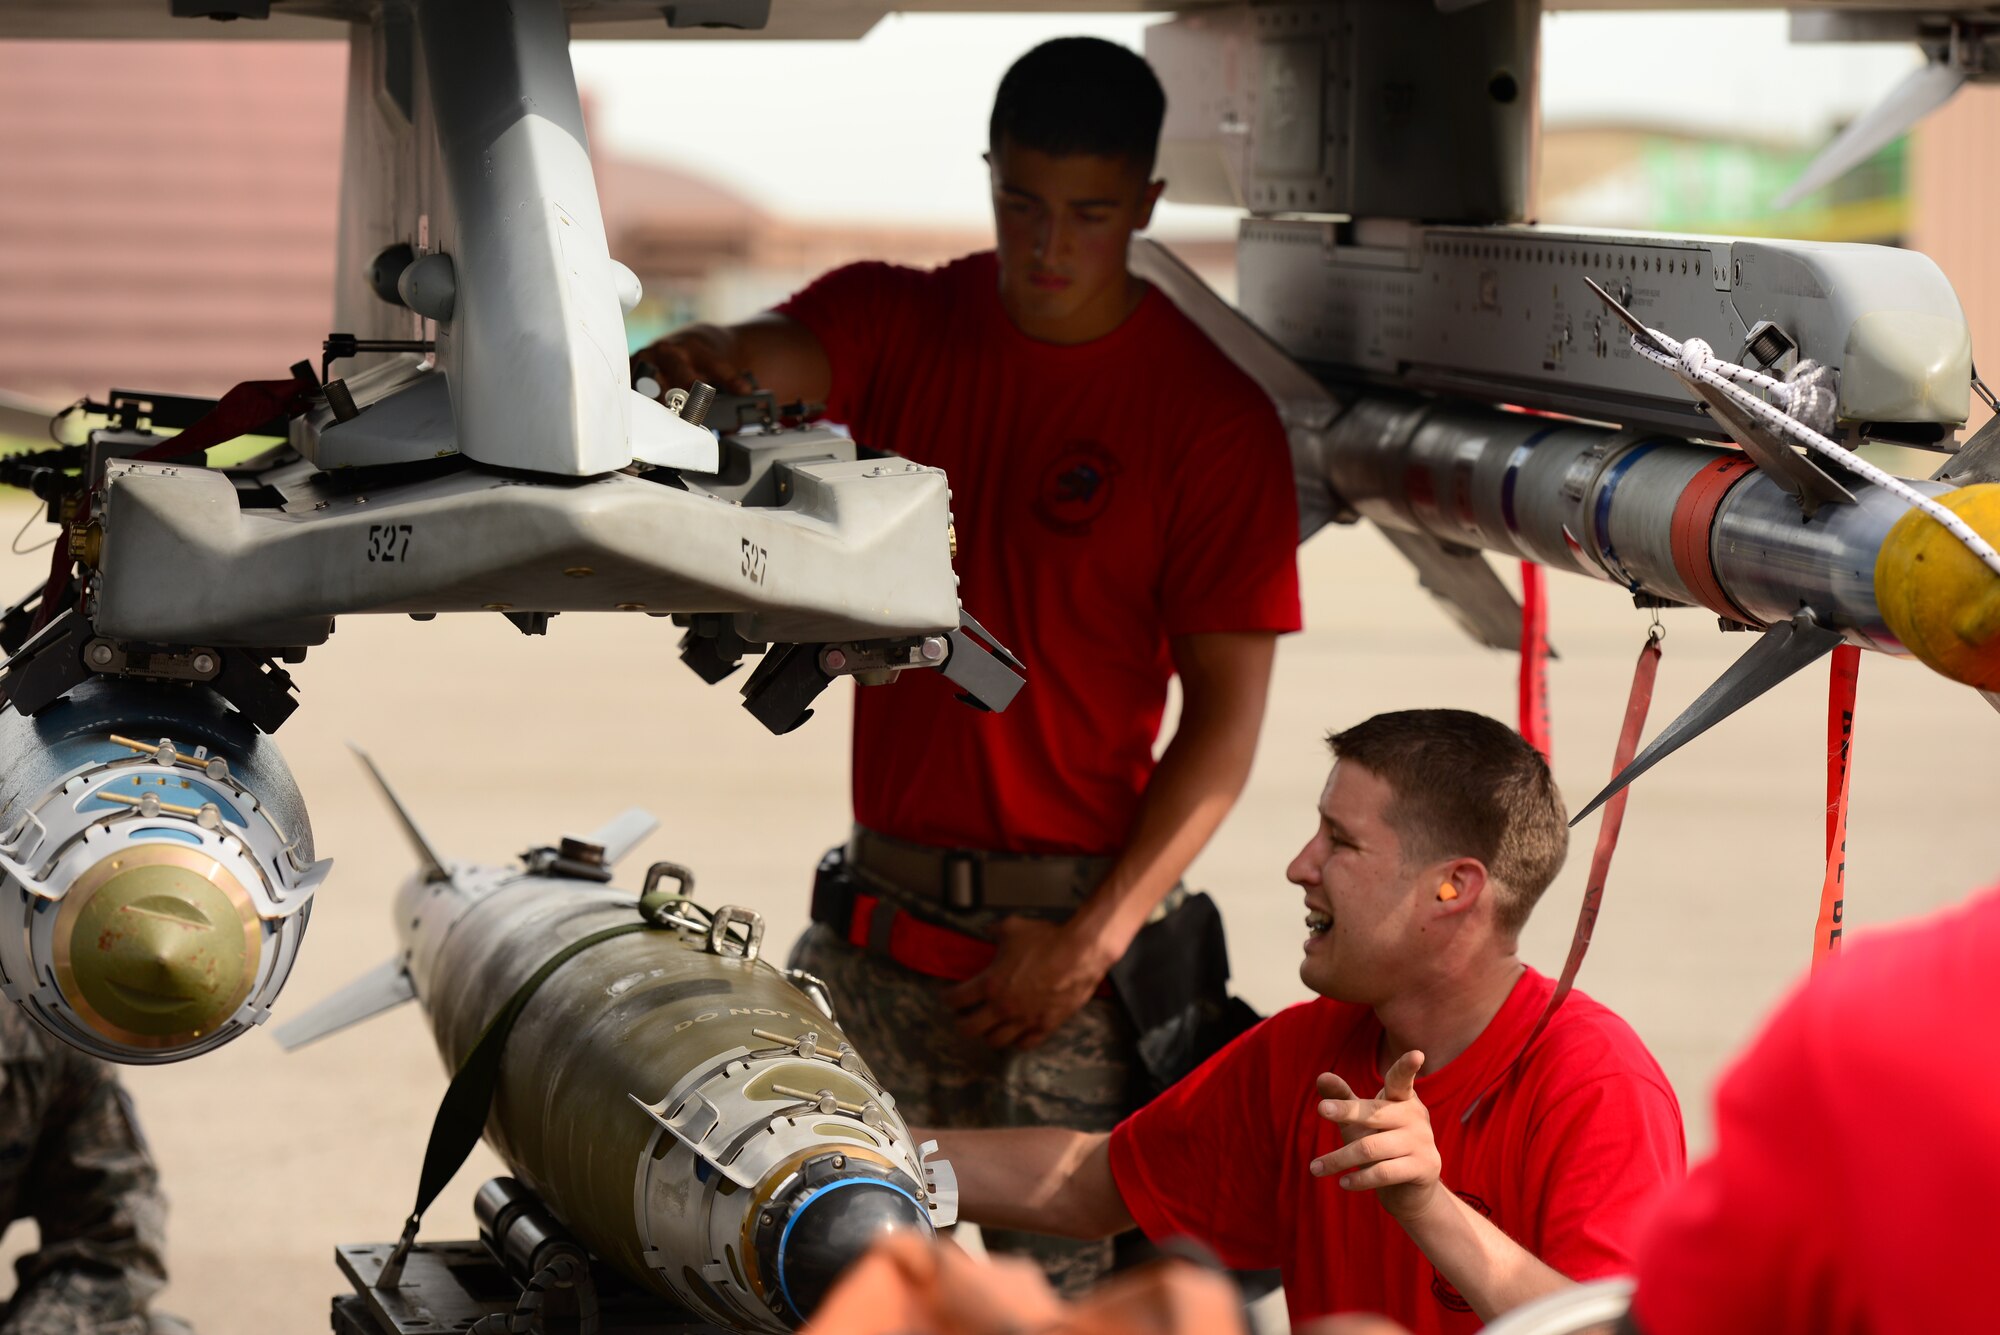 U.S. Air Force Staff Sgt. Kevin Vinson, 36th Aircraft Maintenance Unit weapons loader, directs the loading of practice munitions during the quarterly load competition held at Osan Air Base, Republic of Korea, July 10, 2015. The event adds an element of competition to a qualification test for the technicians; competitors must complete a written test and a practical demonstration of skill within a fixed amount of time in order to maintain mission readiness status. (U.S. Air Force photo by Staff Sgt. Amber Grimm/Released)